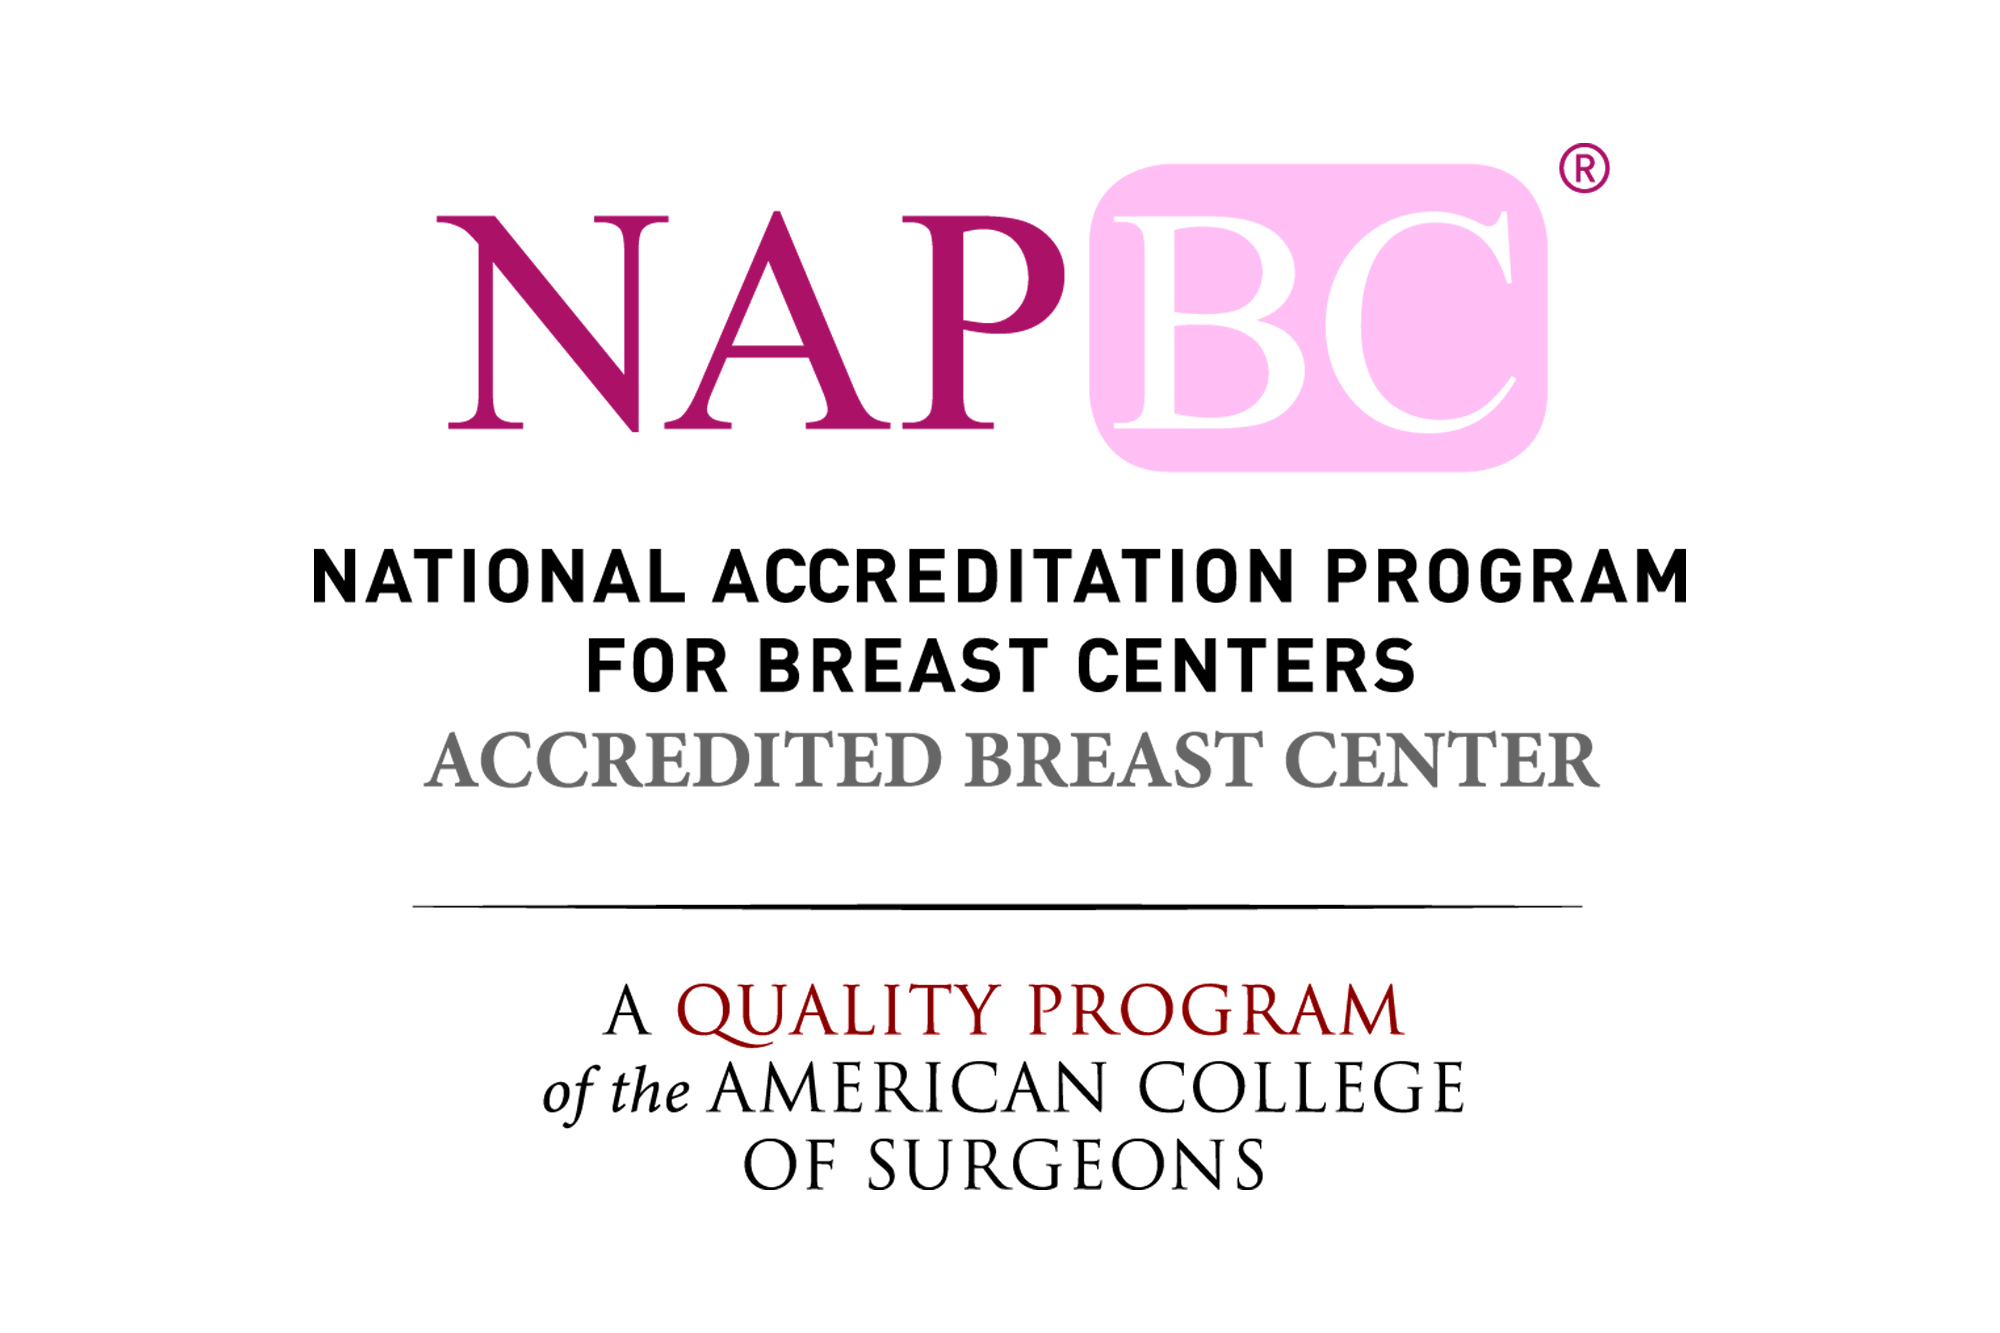 Logo reading NAPBC National Accreditation Program for Breast Centers Accredited Breast Center A Quality Program of the American College of Surgeons